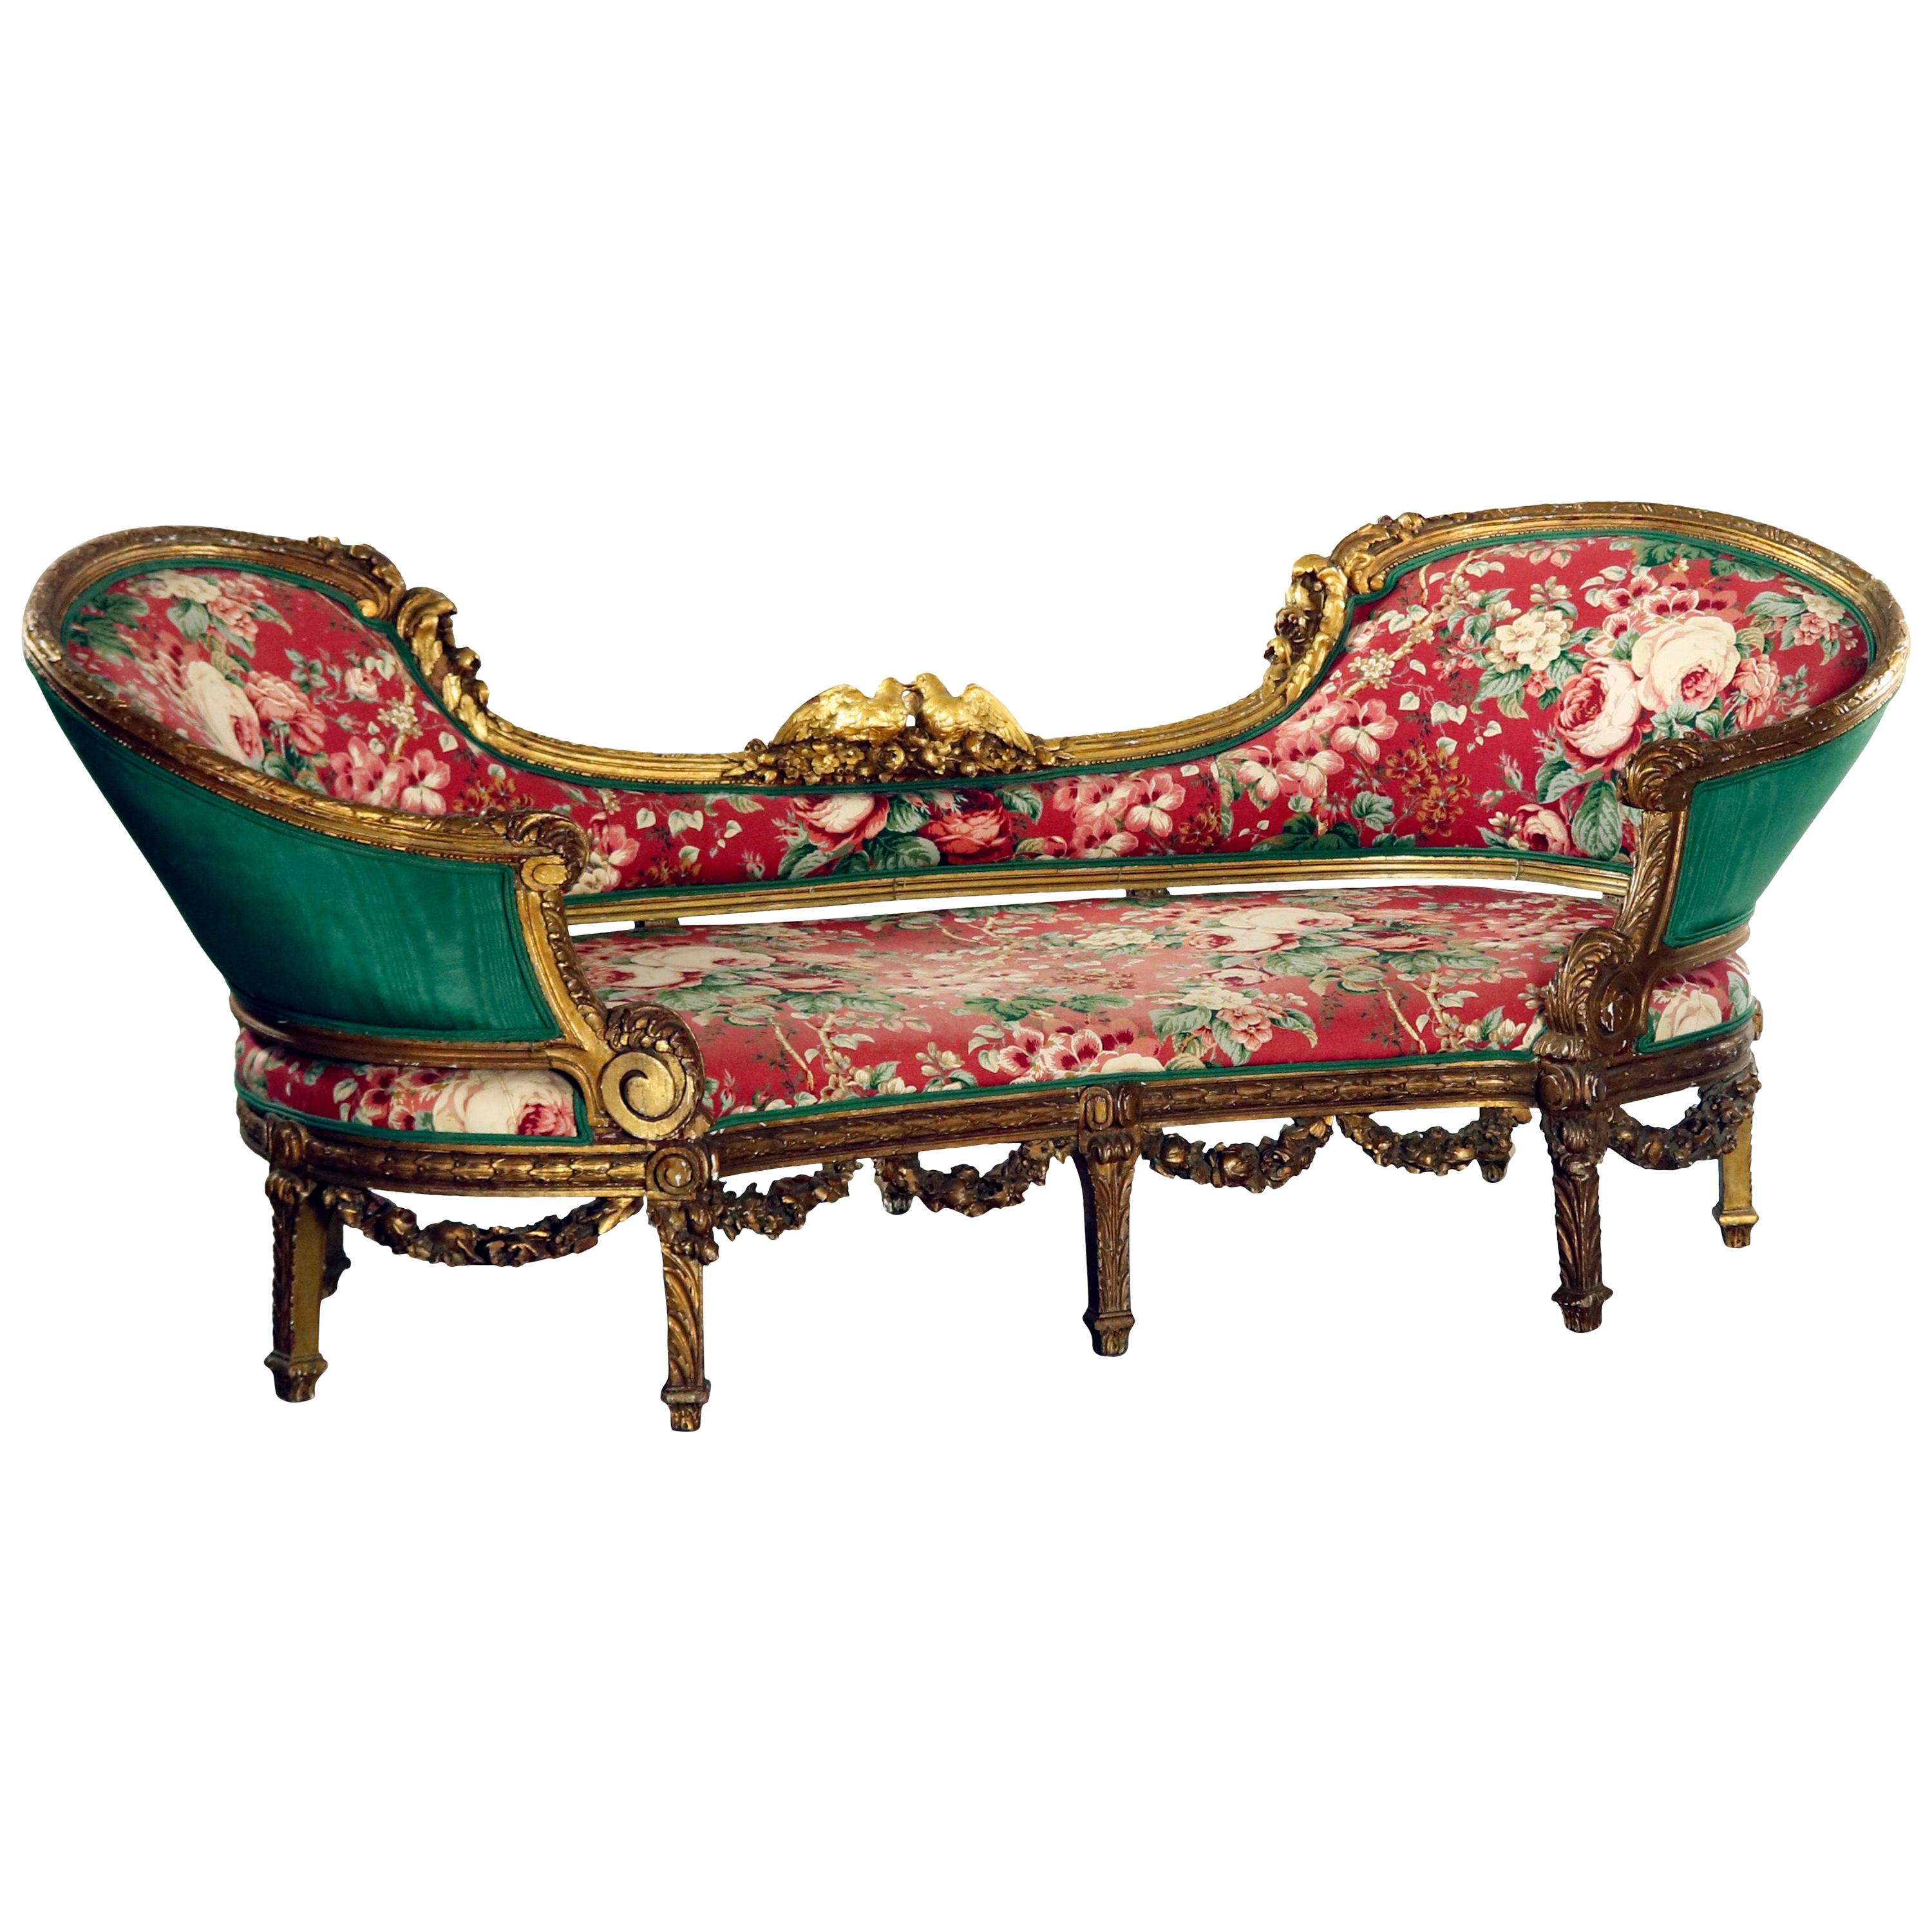 18th Century French Louis XV Carved Giltwood Upholstered Recamier Settee